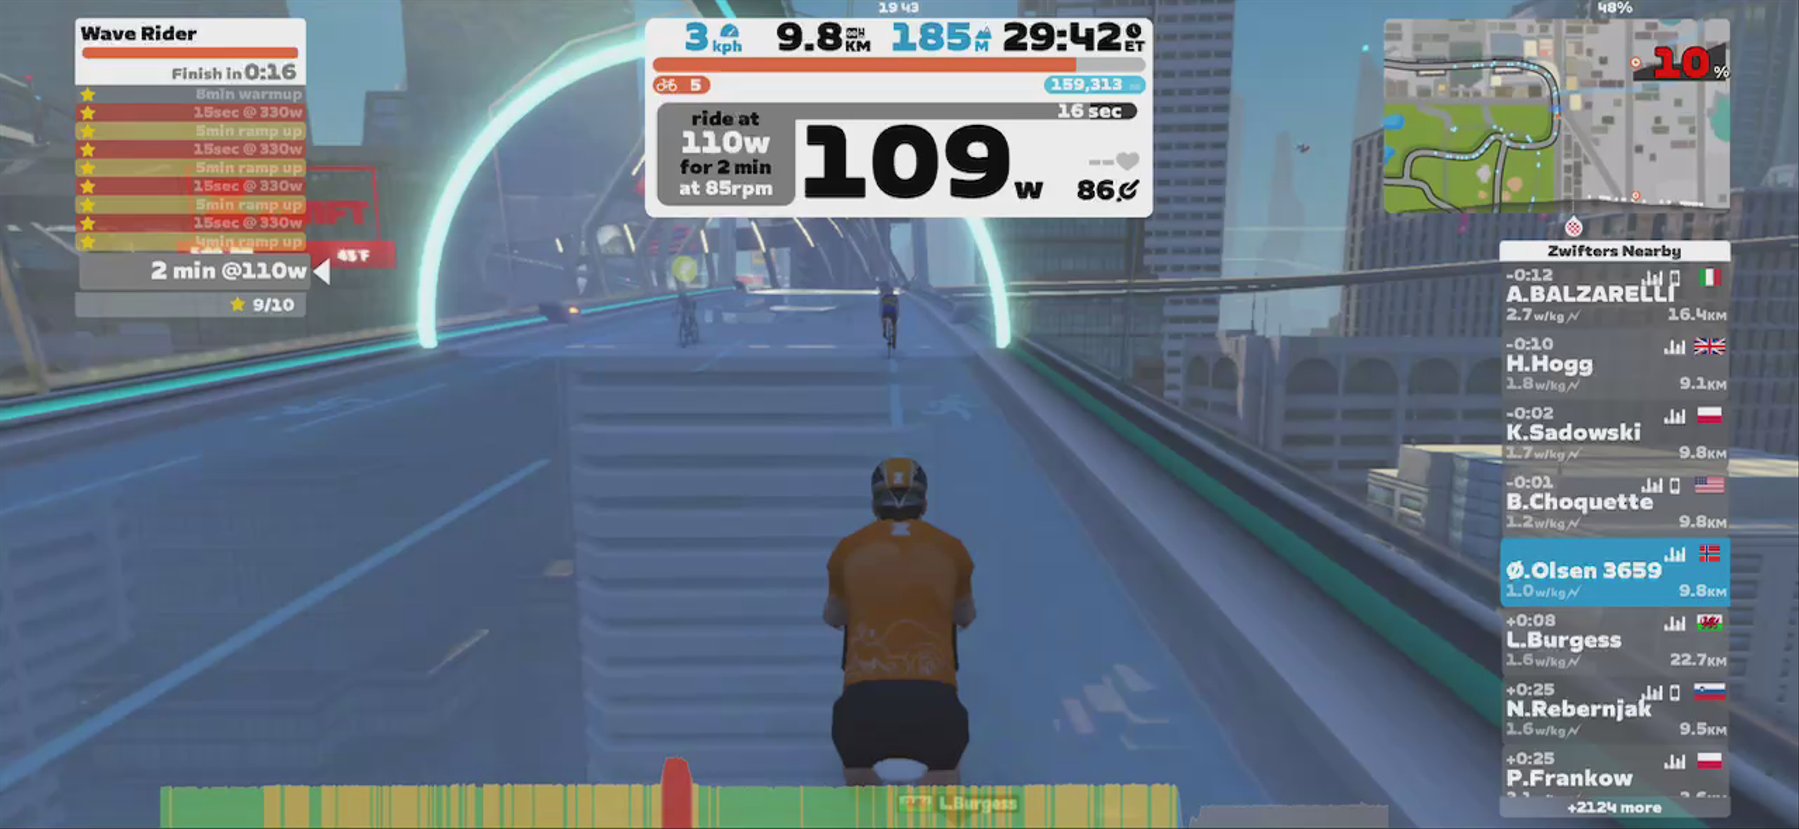 Zwift - Workout of the Week | Wave Rider in New York